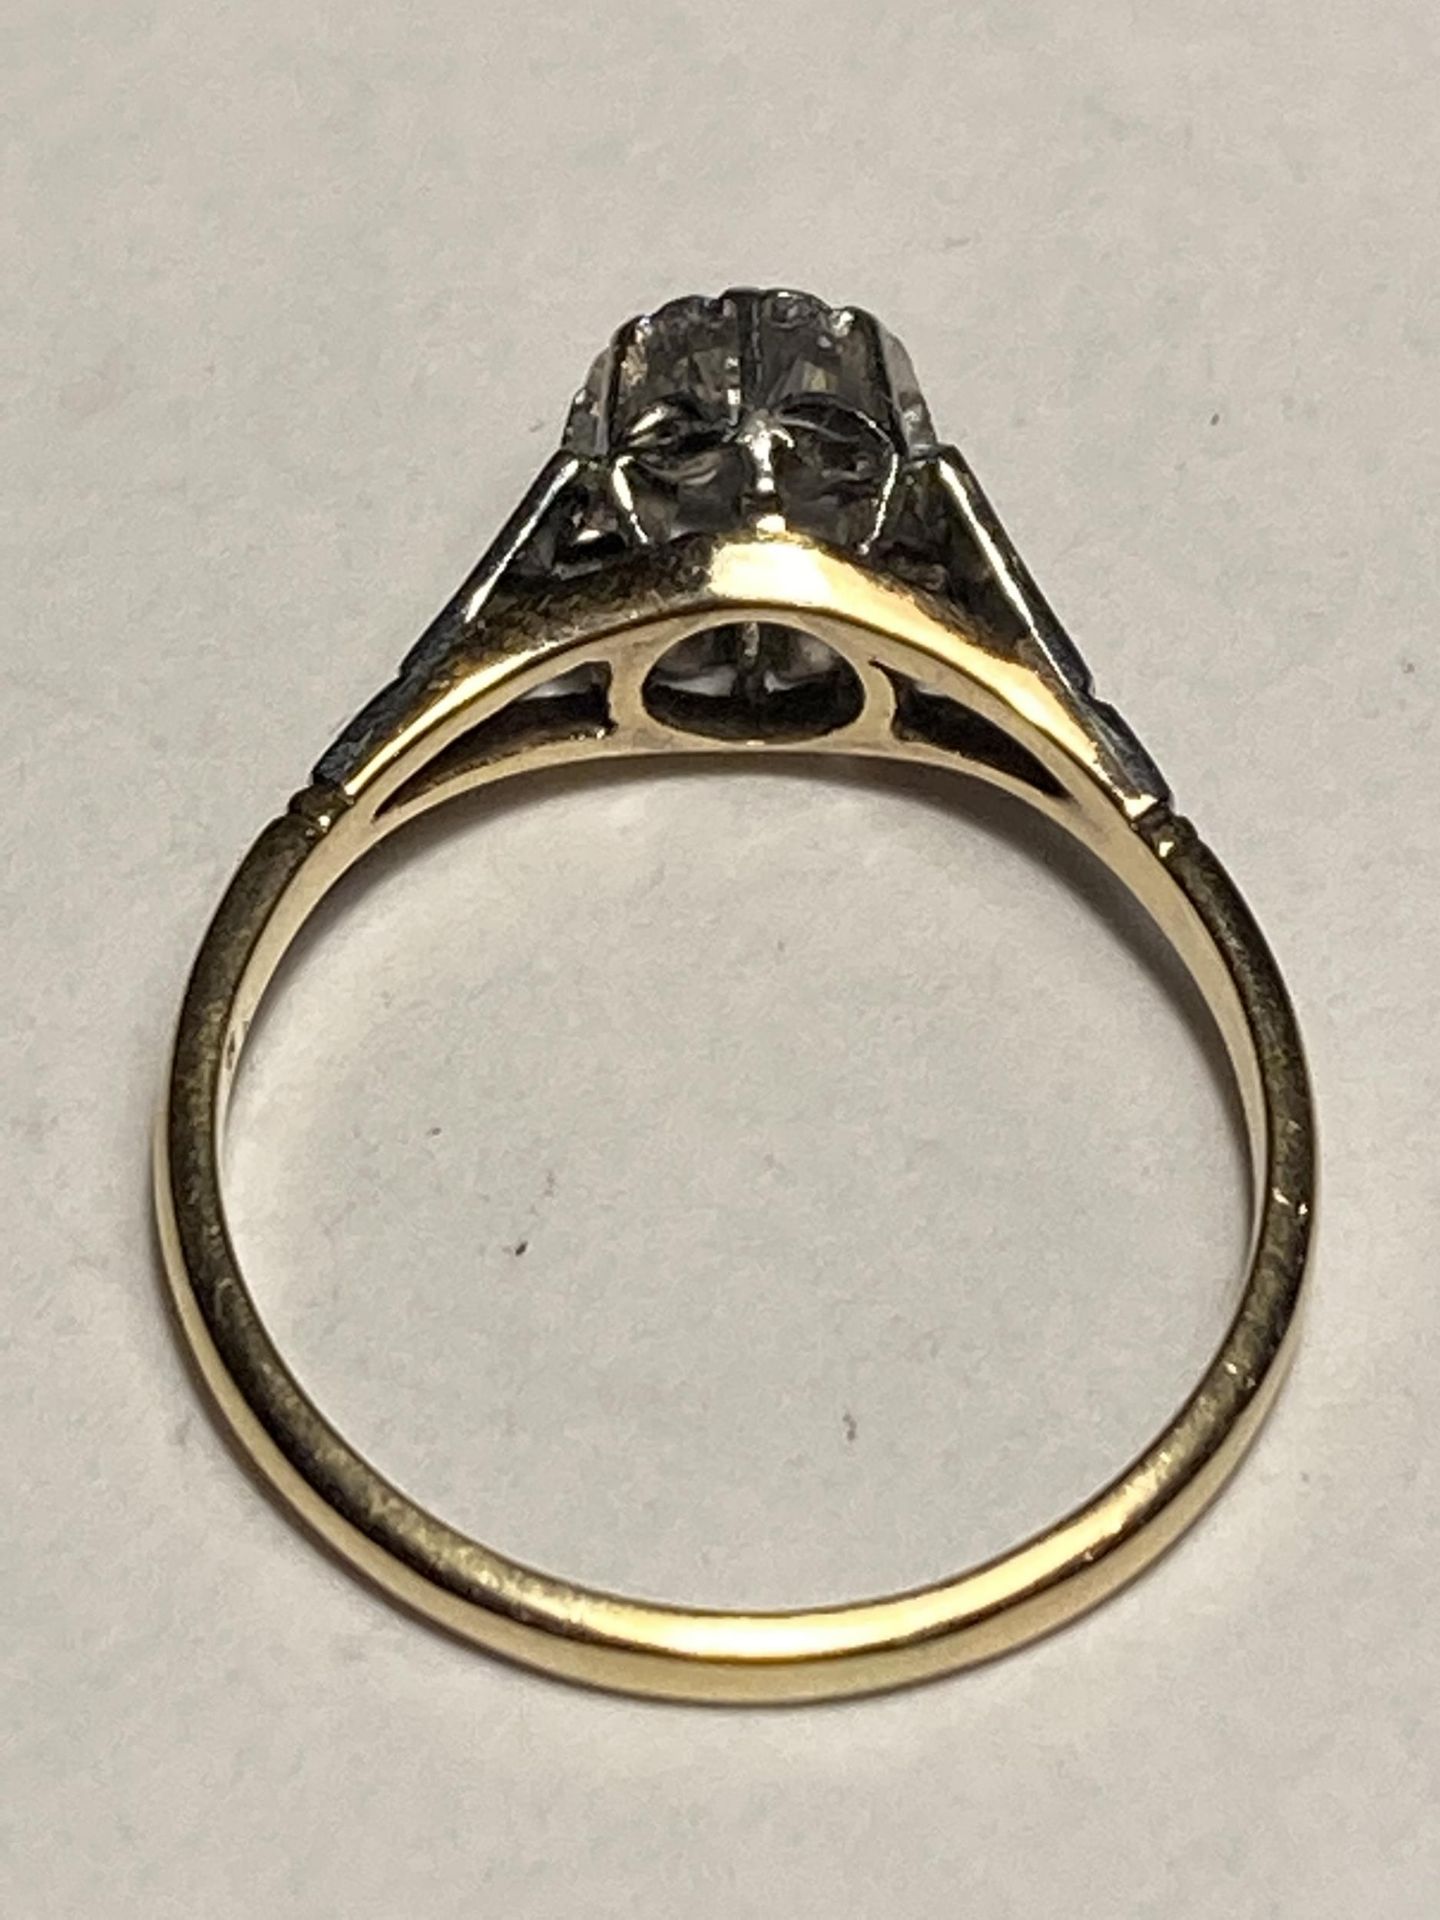 AN 18 CARAT GOLD AND PLATINUM CROWNED DIAMOND SOLITAIRE RING SIZE P - Image 3 of 3